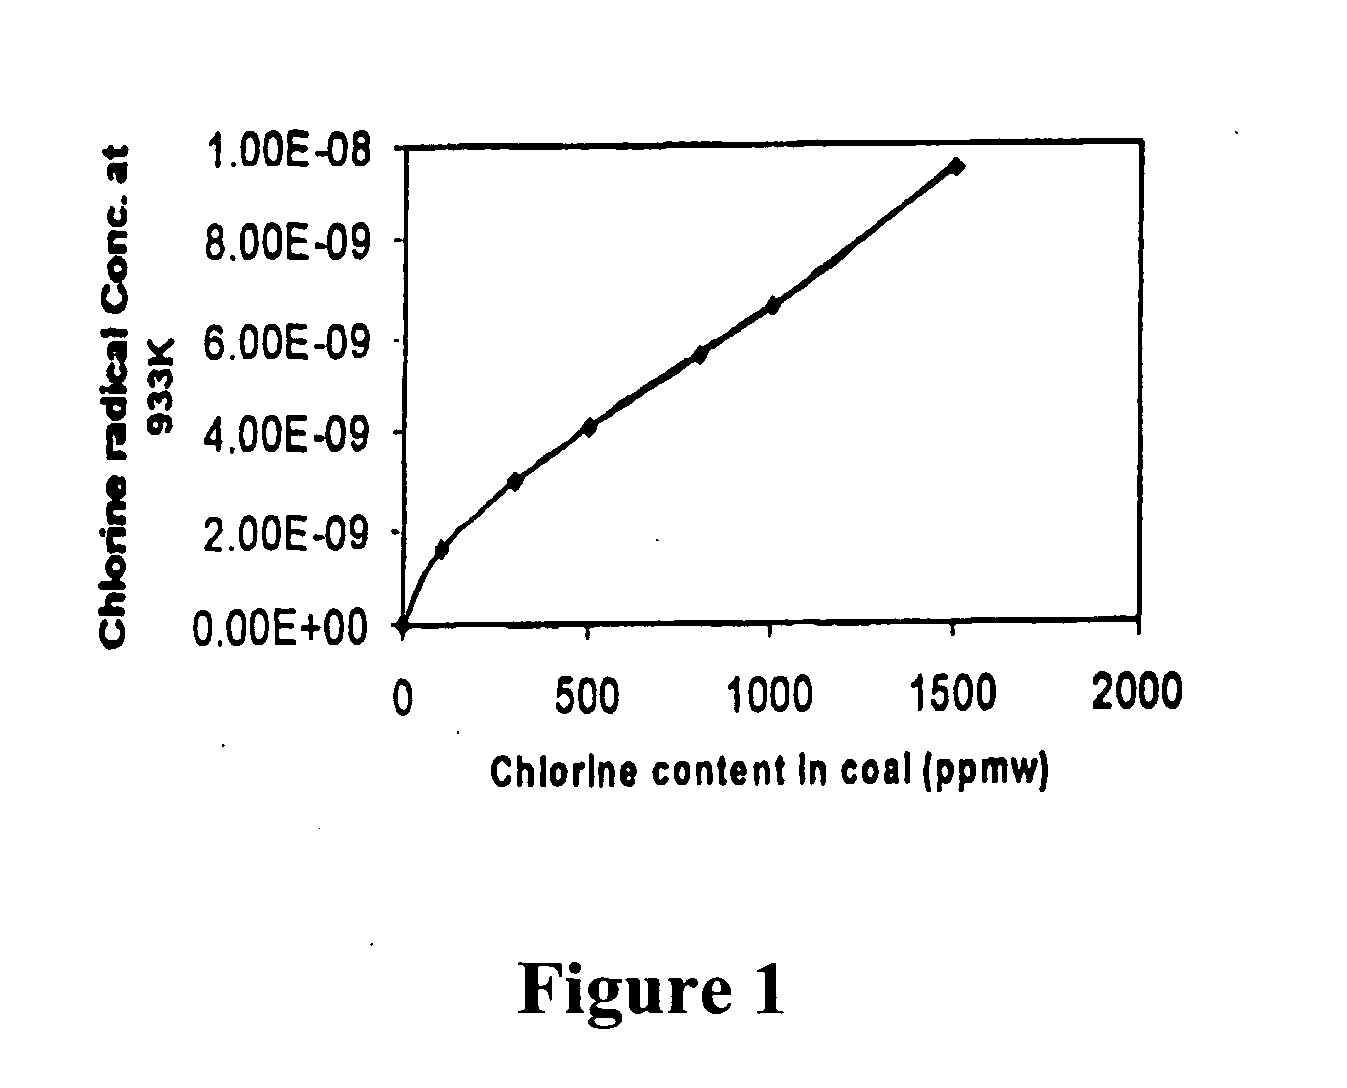 Method of removing mercury from flue gas through enhancement of high temperature oxidation